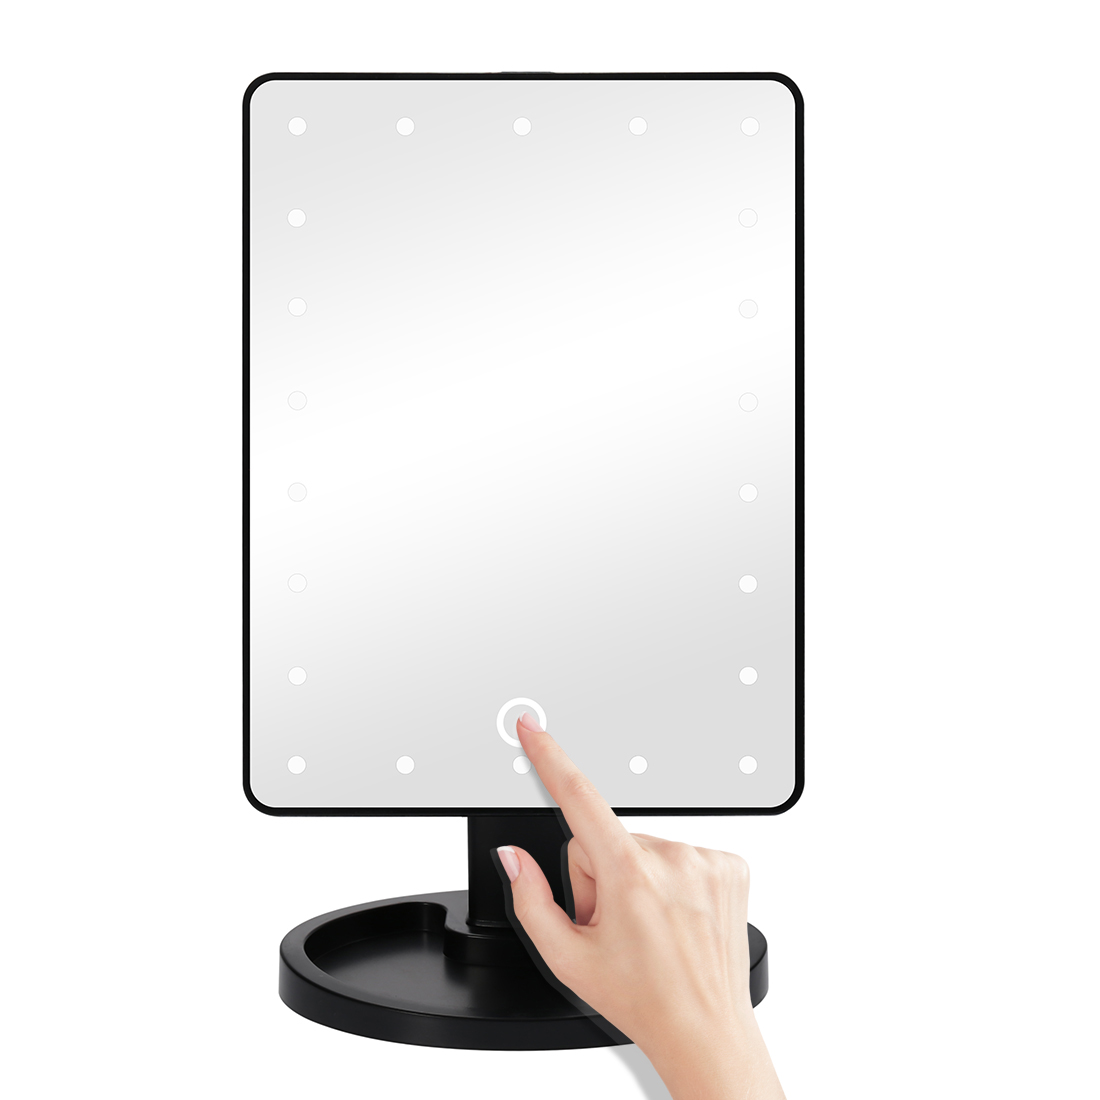 22 LED Touch Screen Makeup Mirror Tabletop Cosmetic Vanity Light Up Mirror - Black